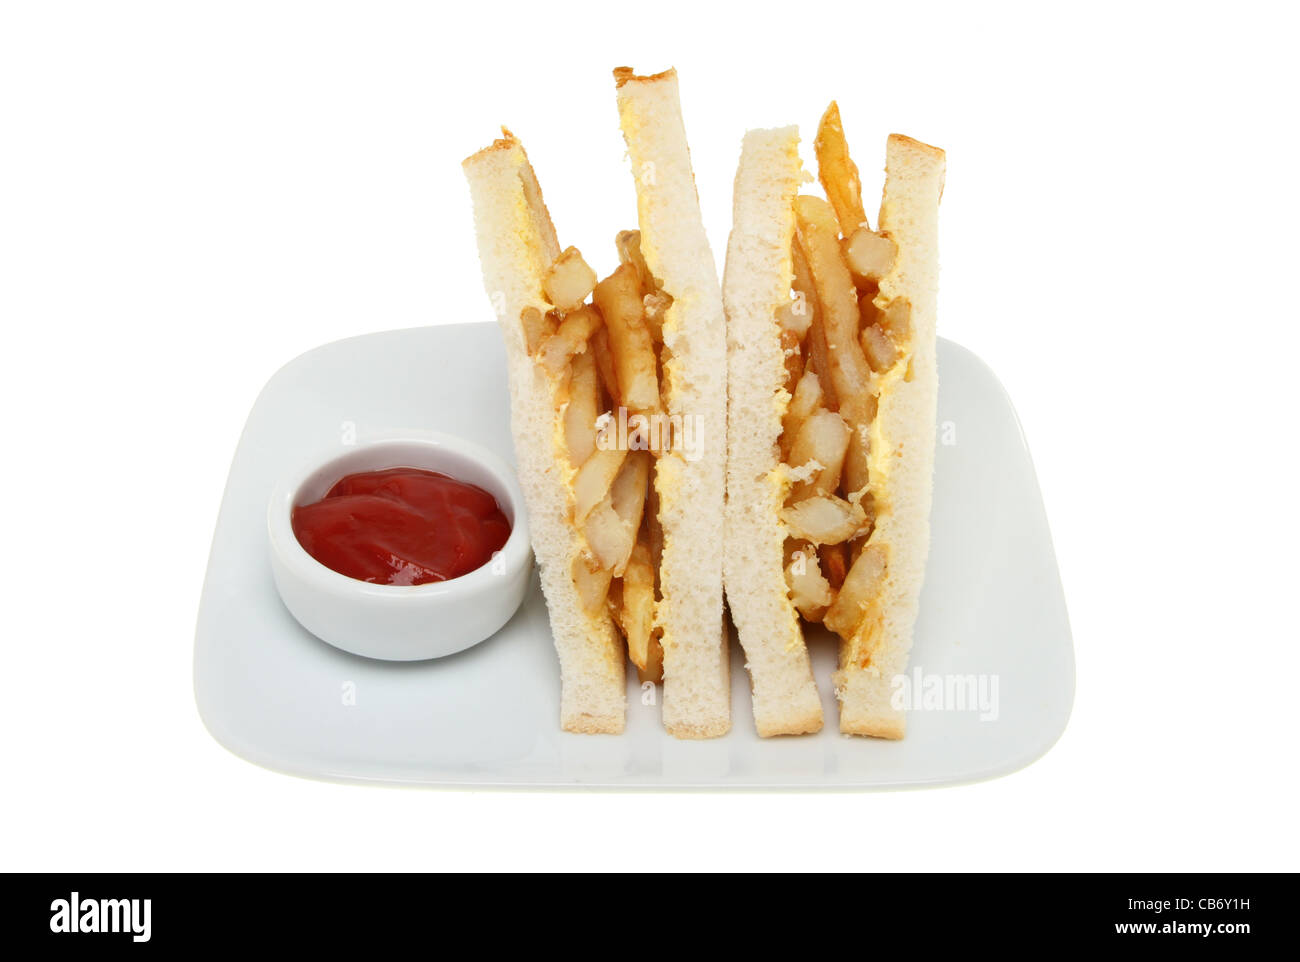 Potato chip sandwich with tomato sauce on a plate isolated against white Stock Photo